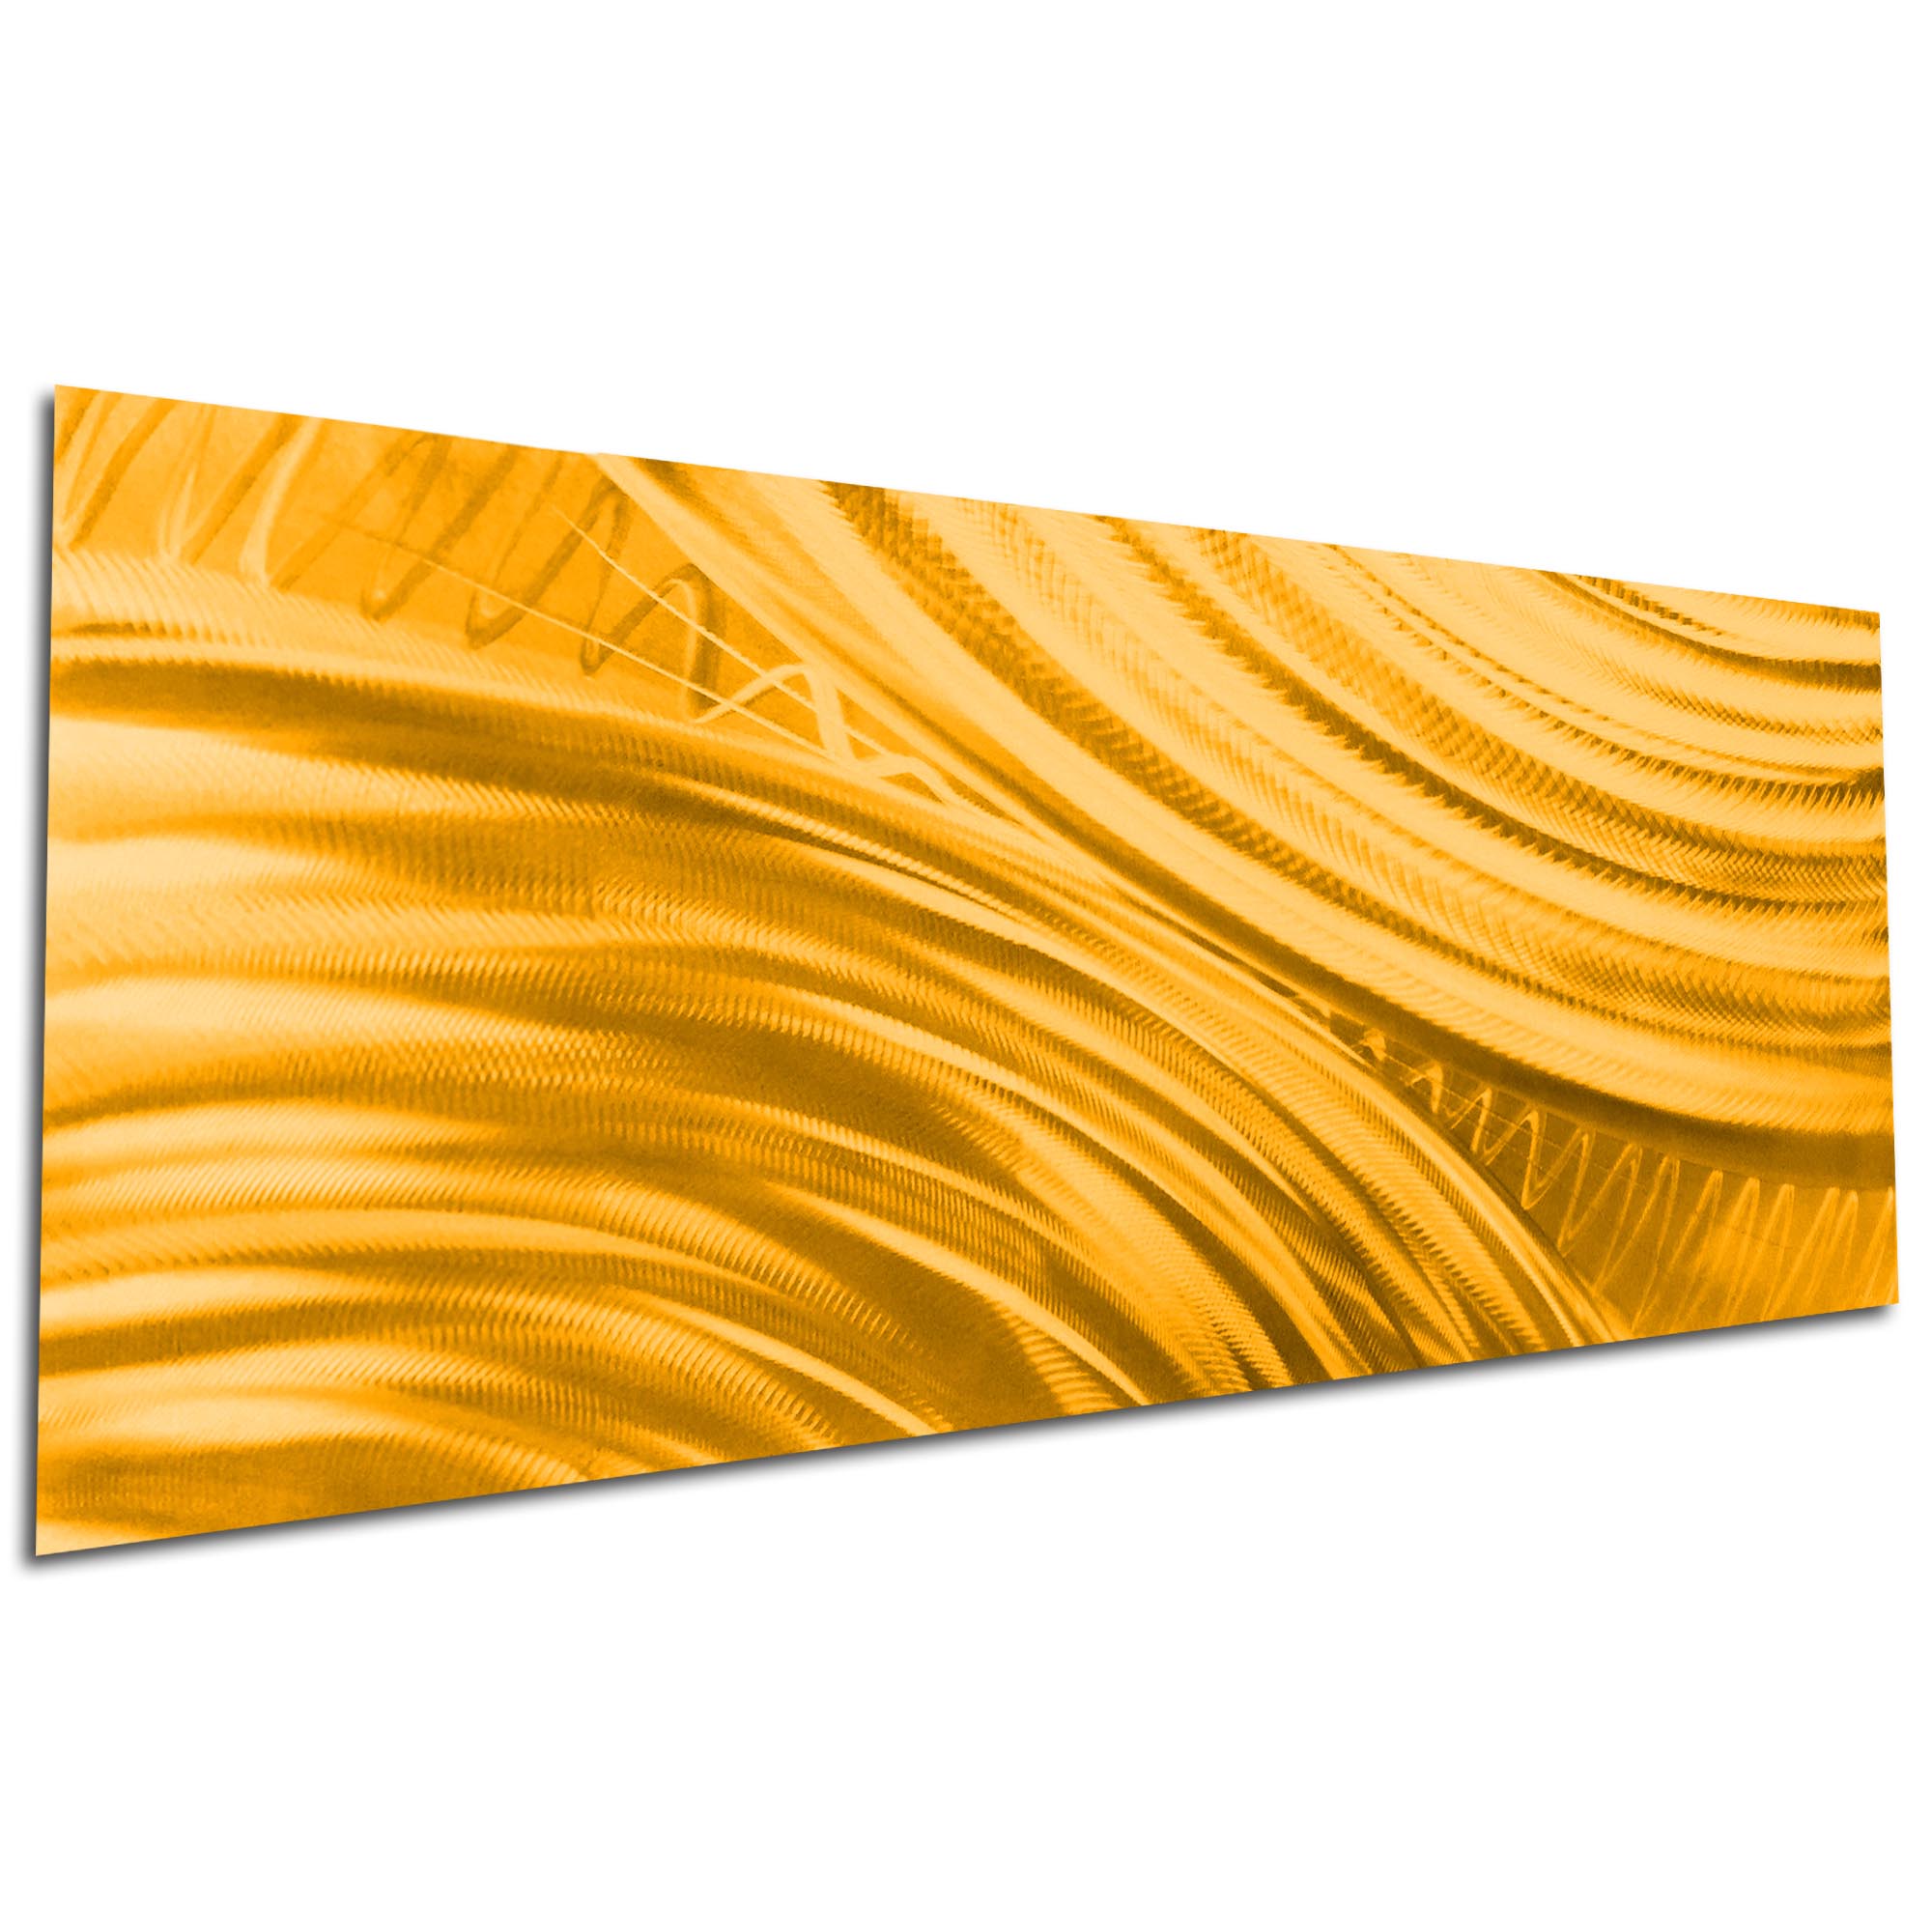 Moment of Impact Gold by Helena Martin - Original Abstract Art on Ground and Painted Metal - Image 3